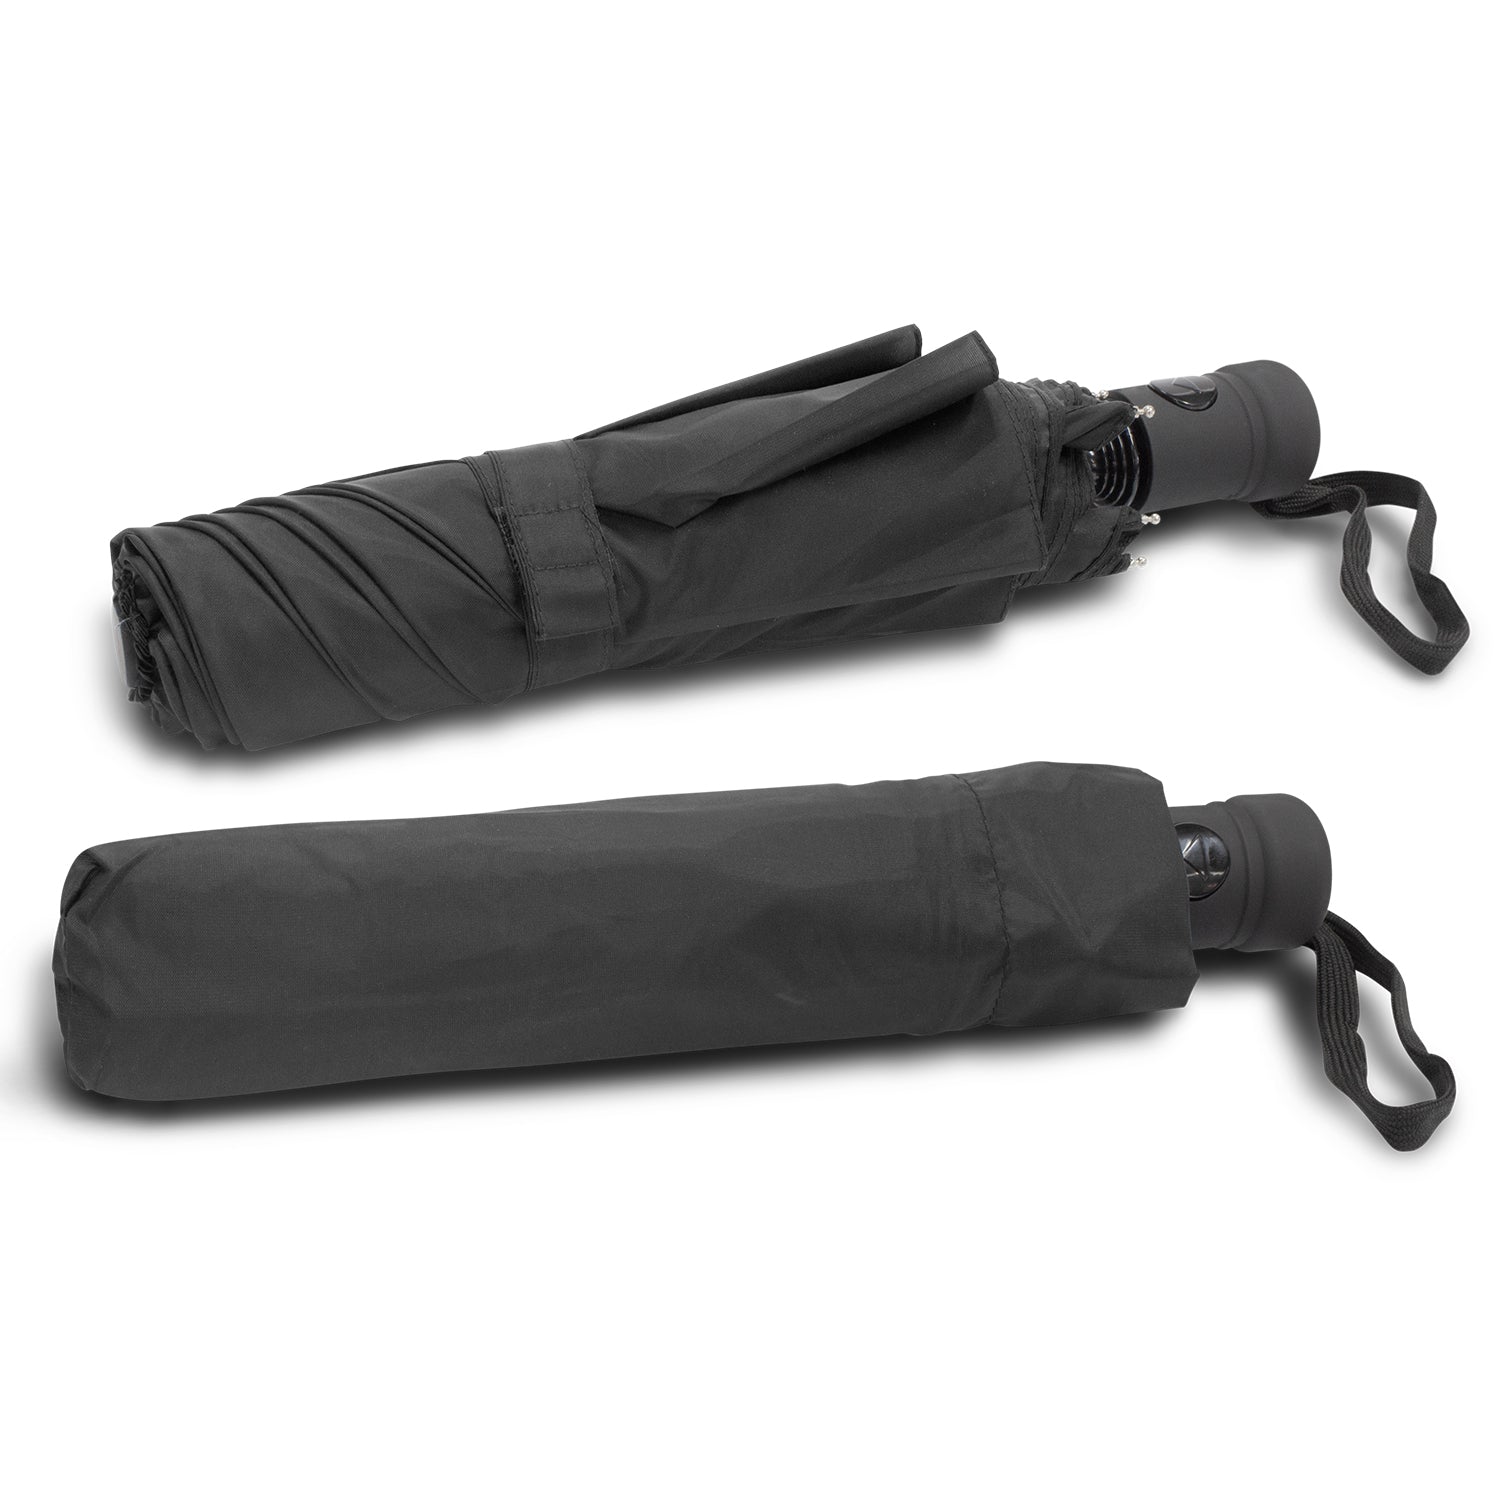 PEROS®️ TRI-FOLD COMPACT - Premium Compact Travel Umbrella with Robust Steel & Fibreglass Frame, Strong 3-Section Steel Shaft - Auto Open